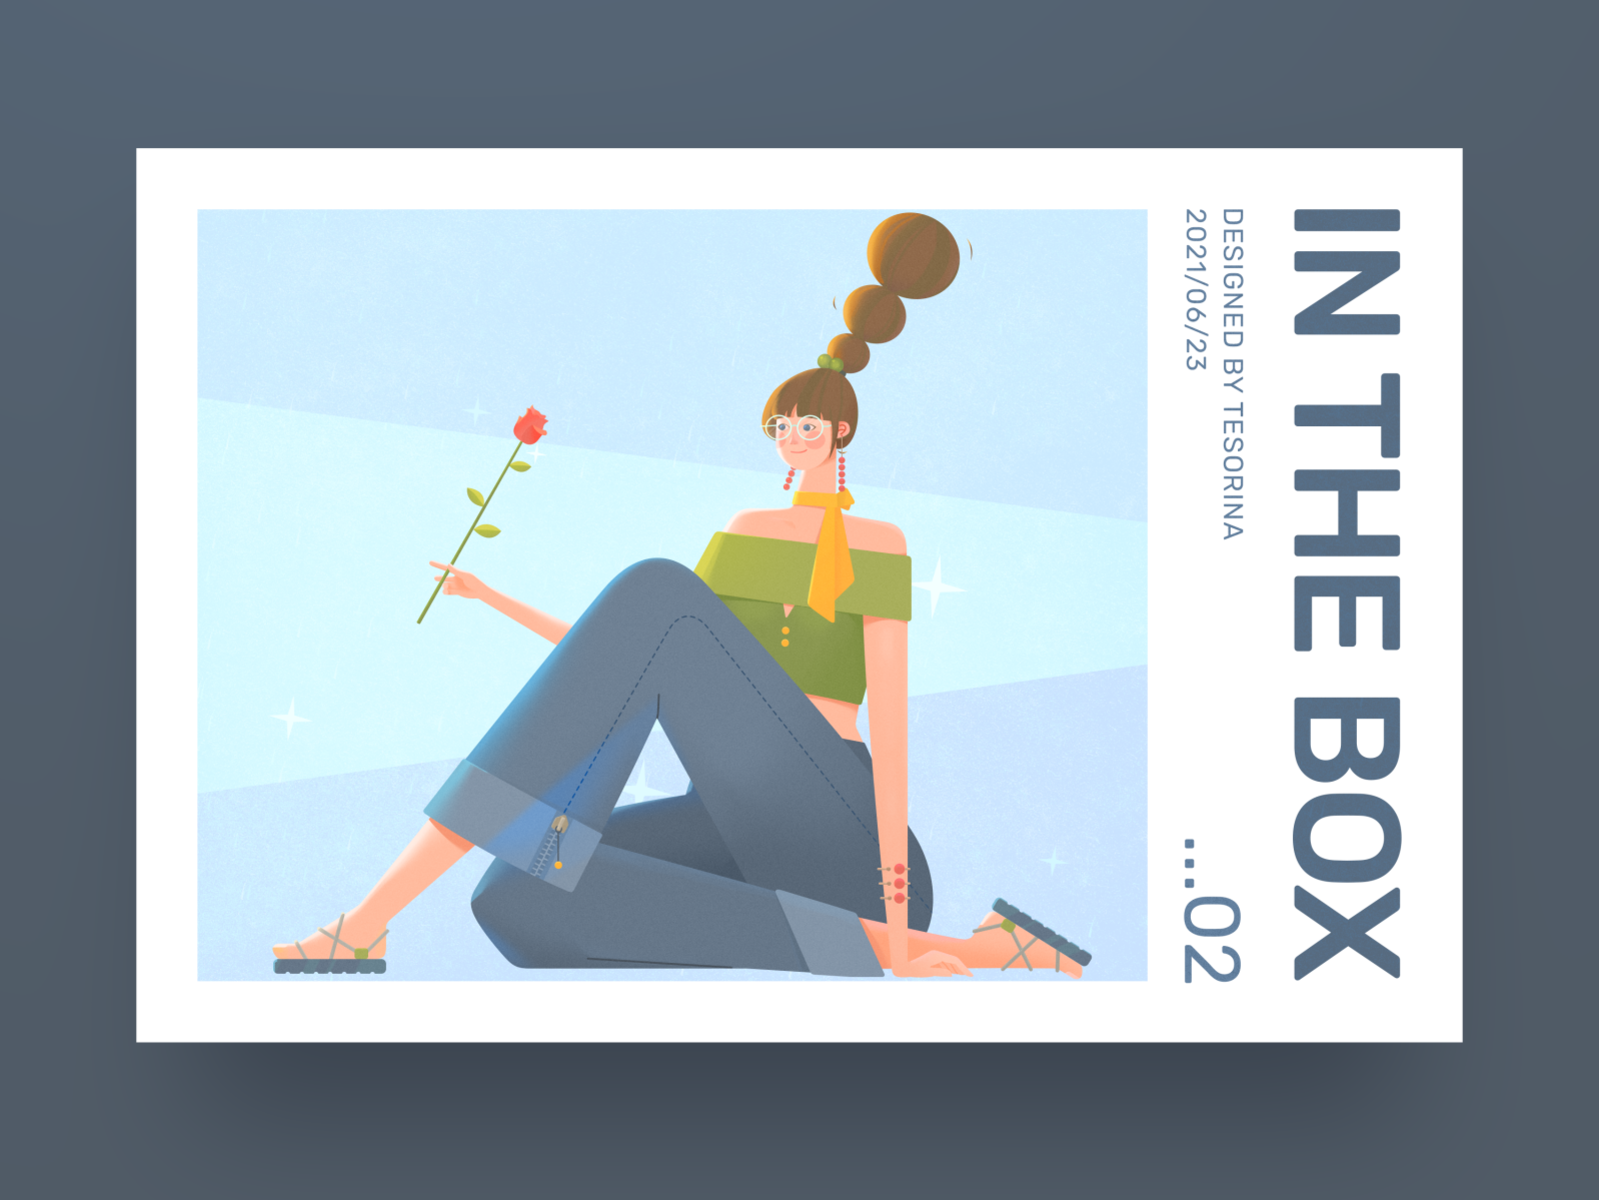 In The Box 2- Girl With Rose box design geometric girl illustration photoshop rest rose sit tesorina triangle 马阿柴